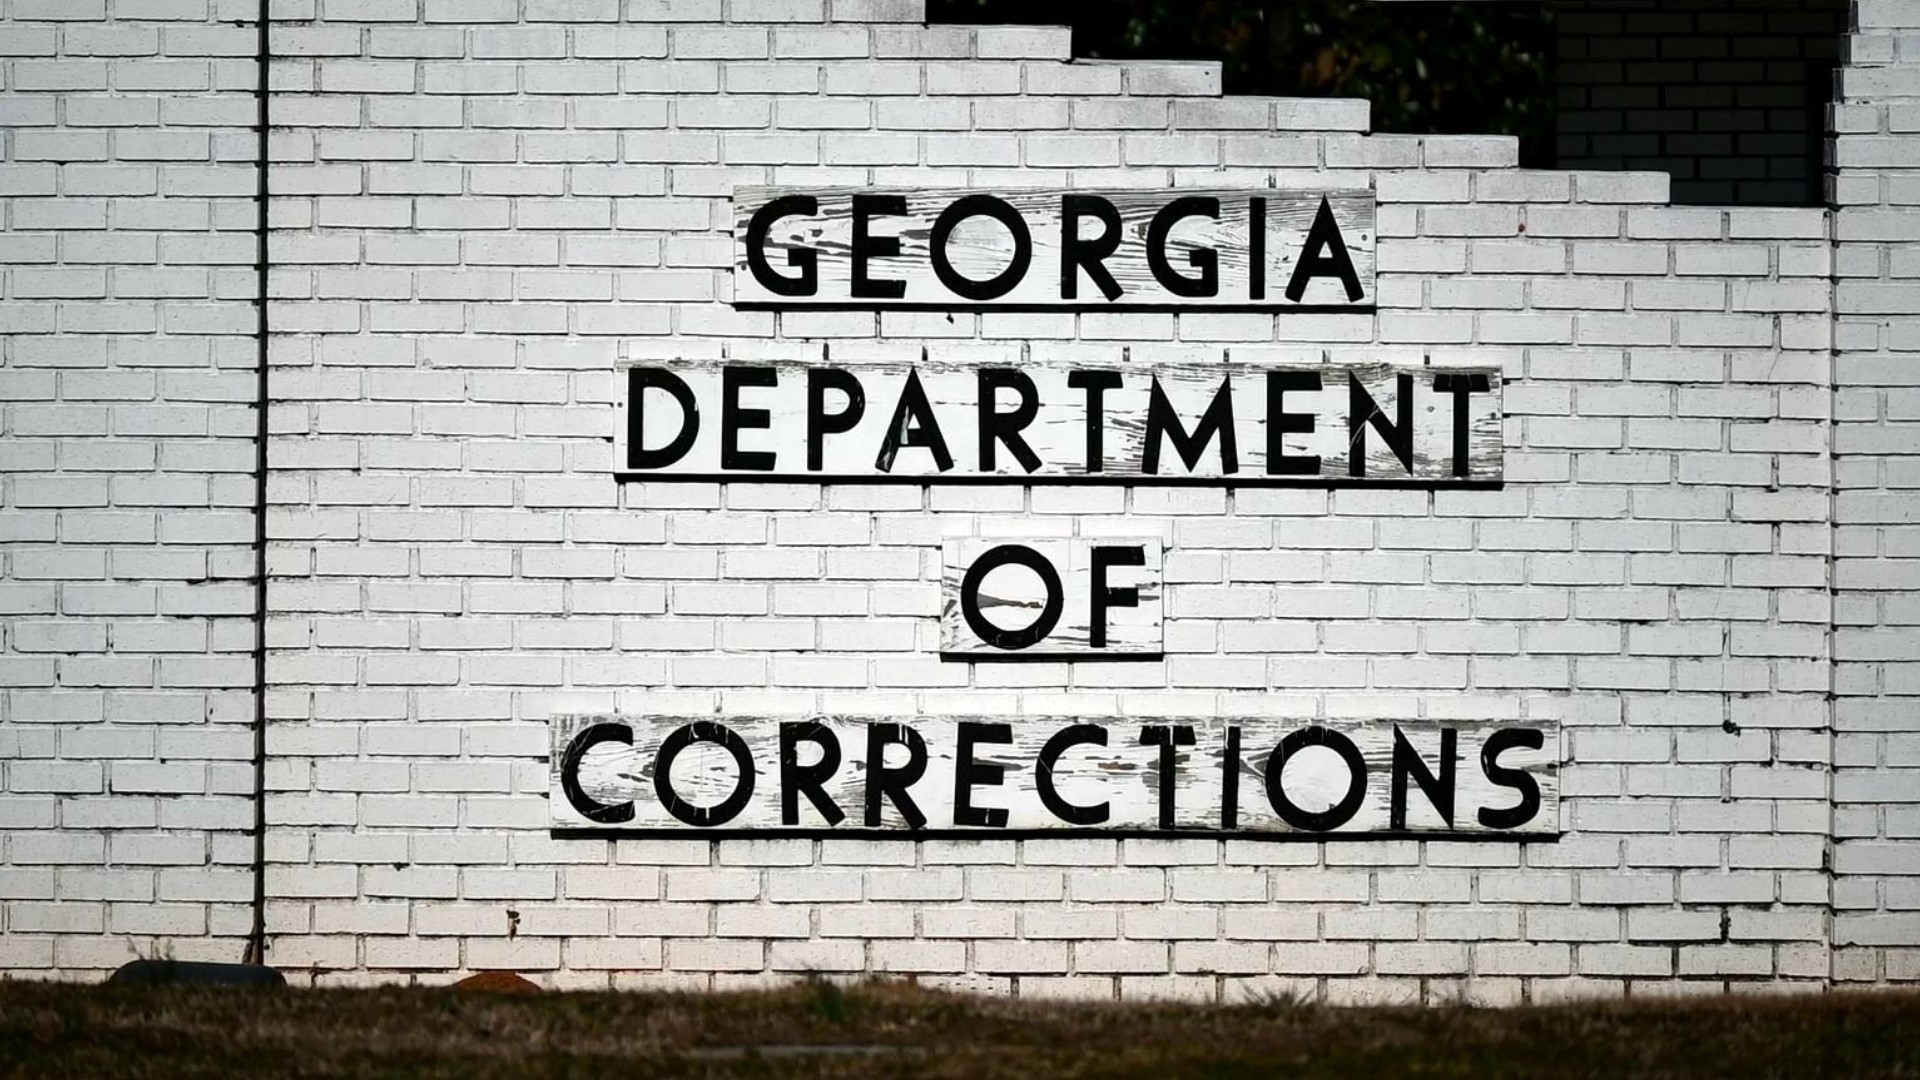 Georgia’s prison system is struggling to control those incarcerated in its care amidst plummeting staff levels, an 11Alive investigation has revealed.